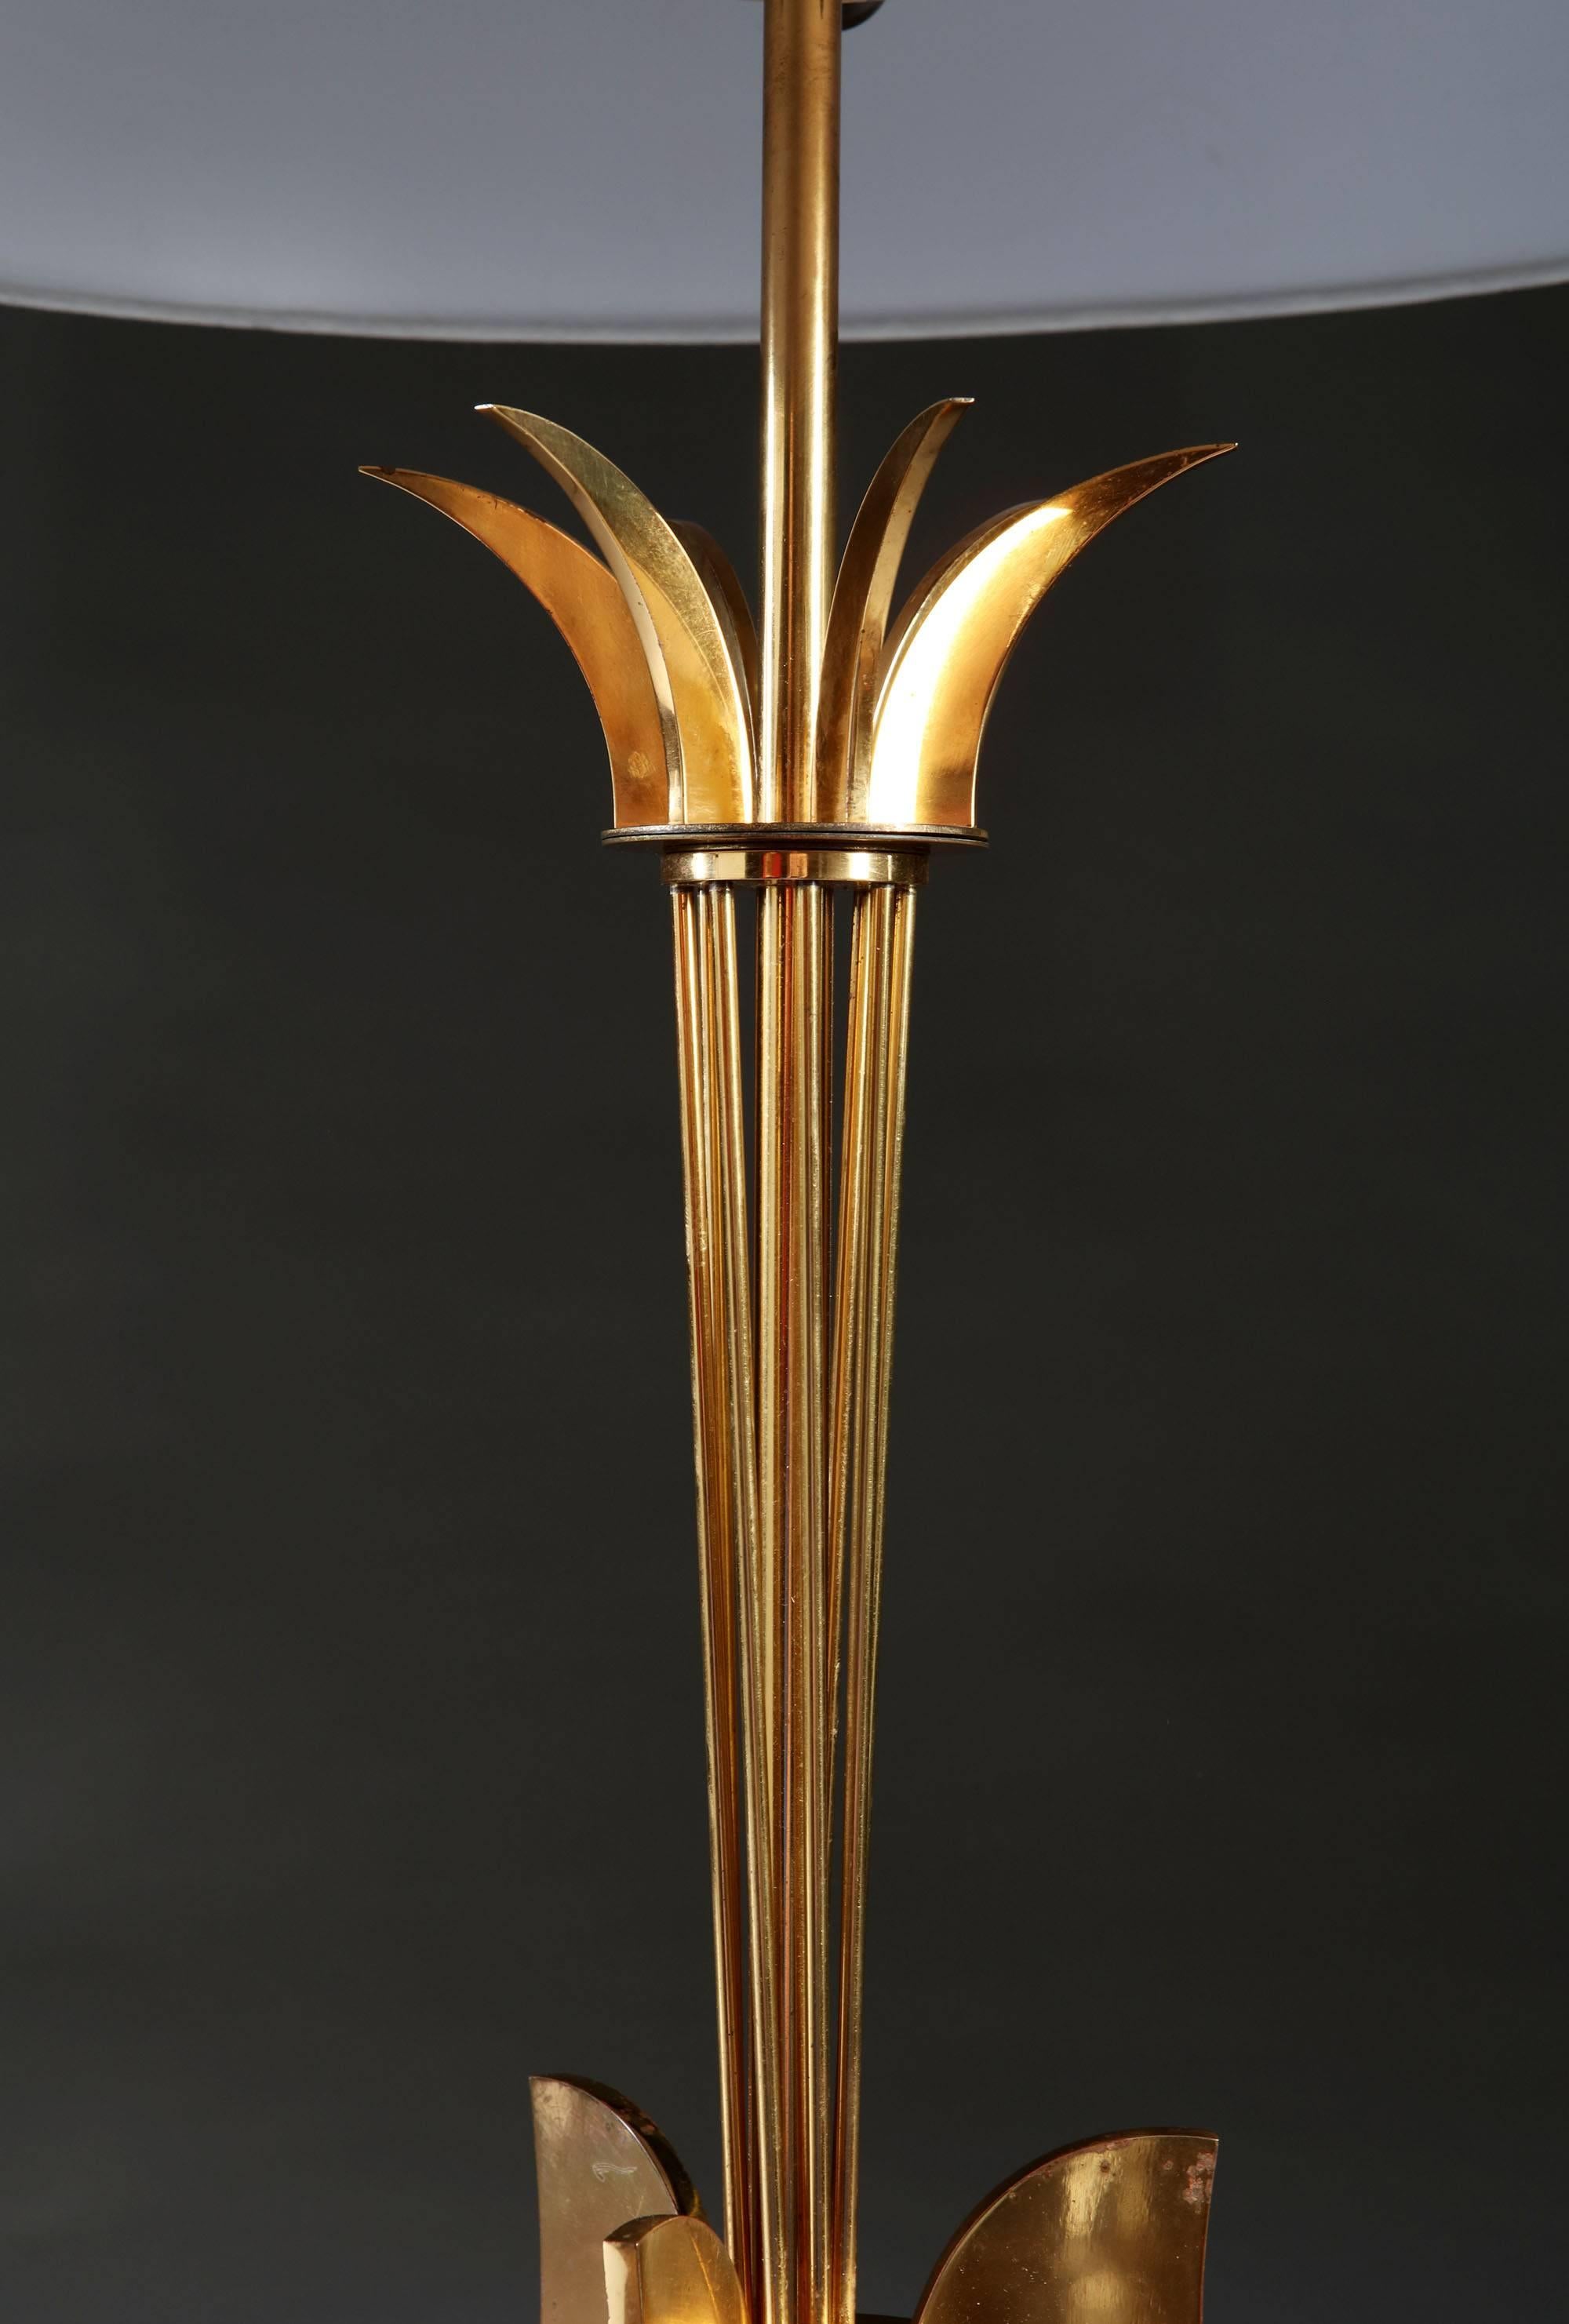 A fine early 20th century gilt bronze Maison Jansen table lamp, with six fronds to the neck and a fluted pillar, all standing on a tripod base.